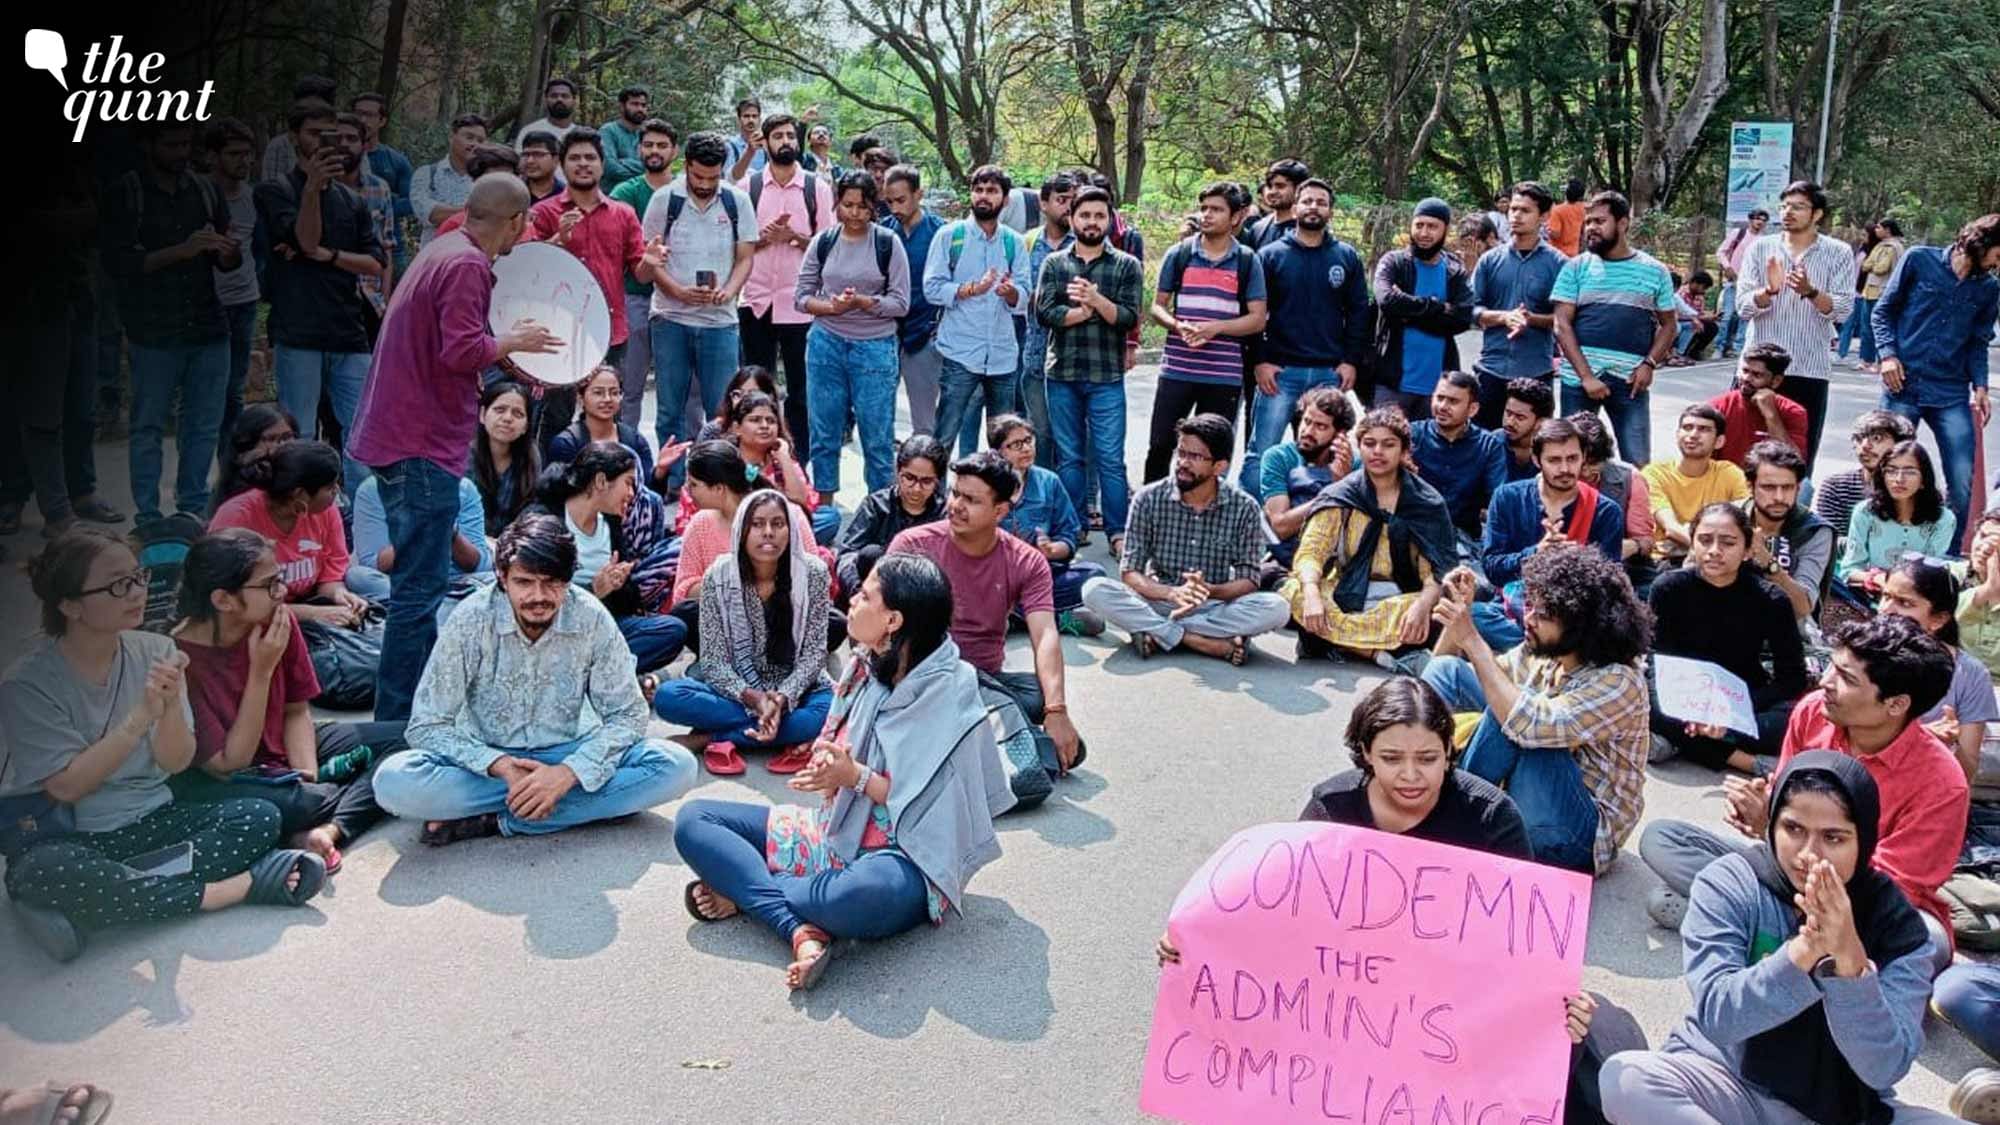 <div class="paragraphs"><p>The accused,  Professor Ravi Ranjan, was arrested by the Gachibowli Police and suspended from the University of Hyderabad on 3 December, after hours of protest by  students.</p></div>